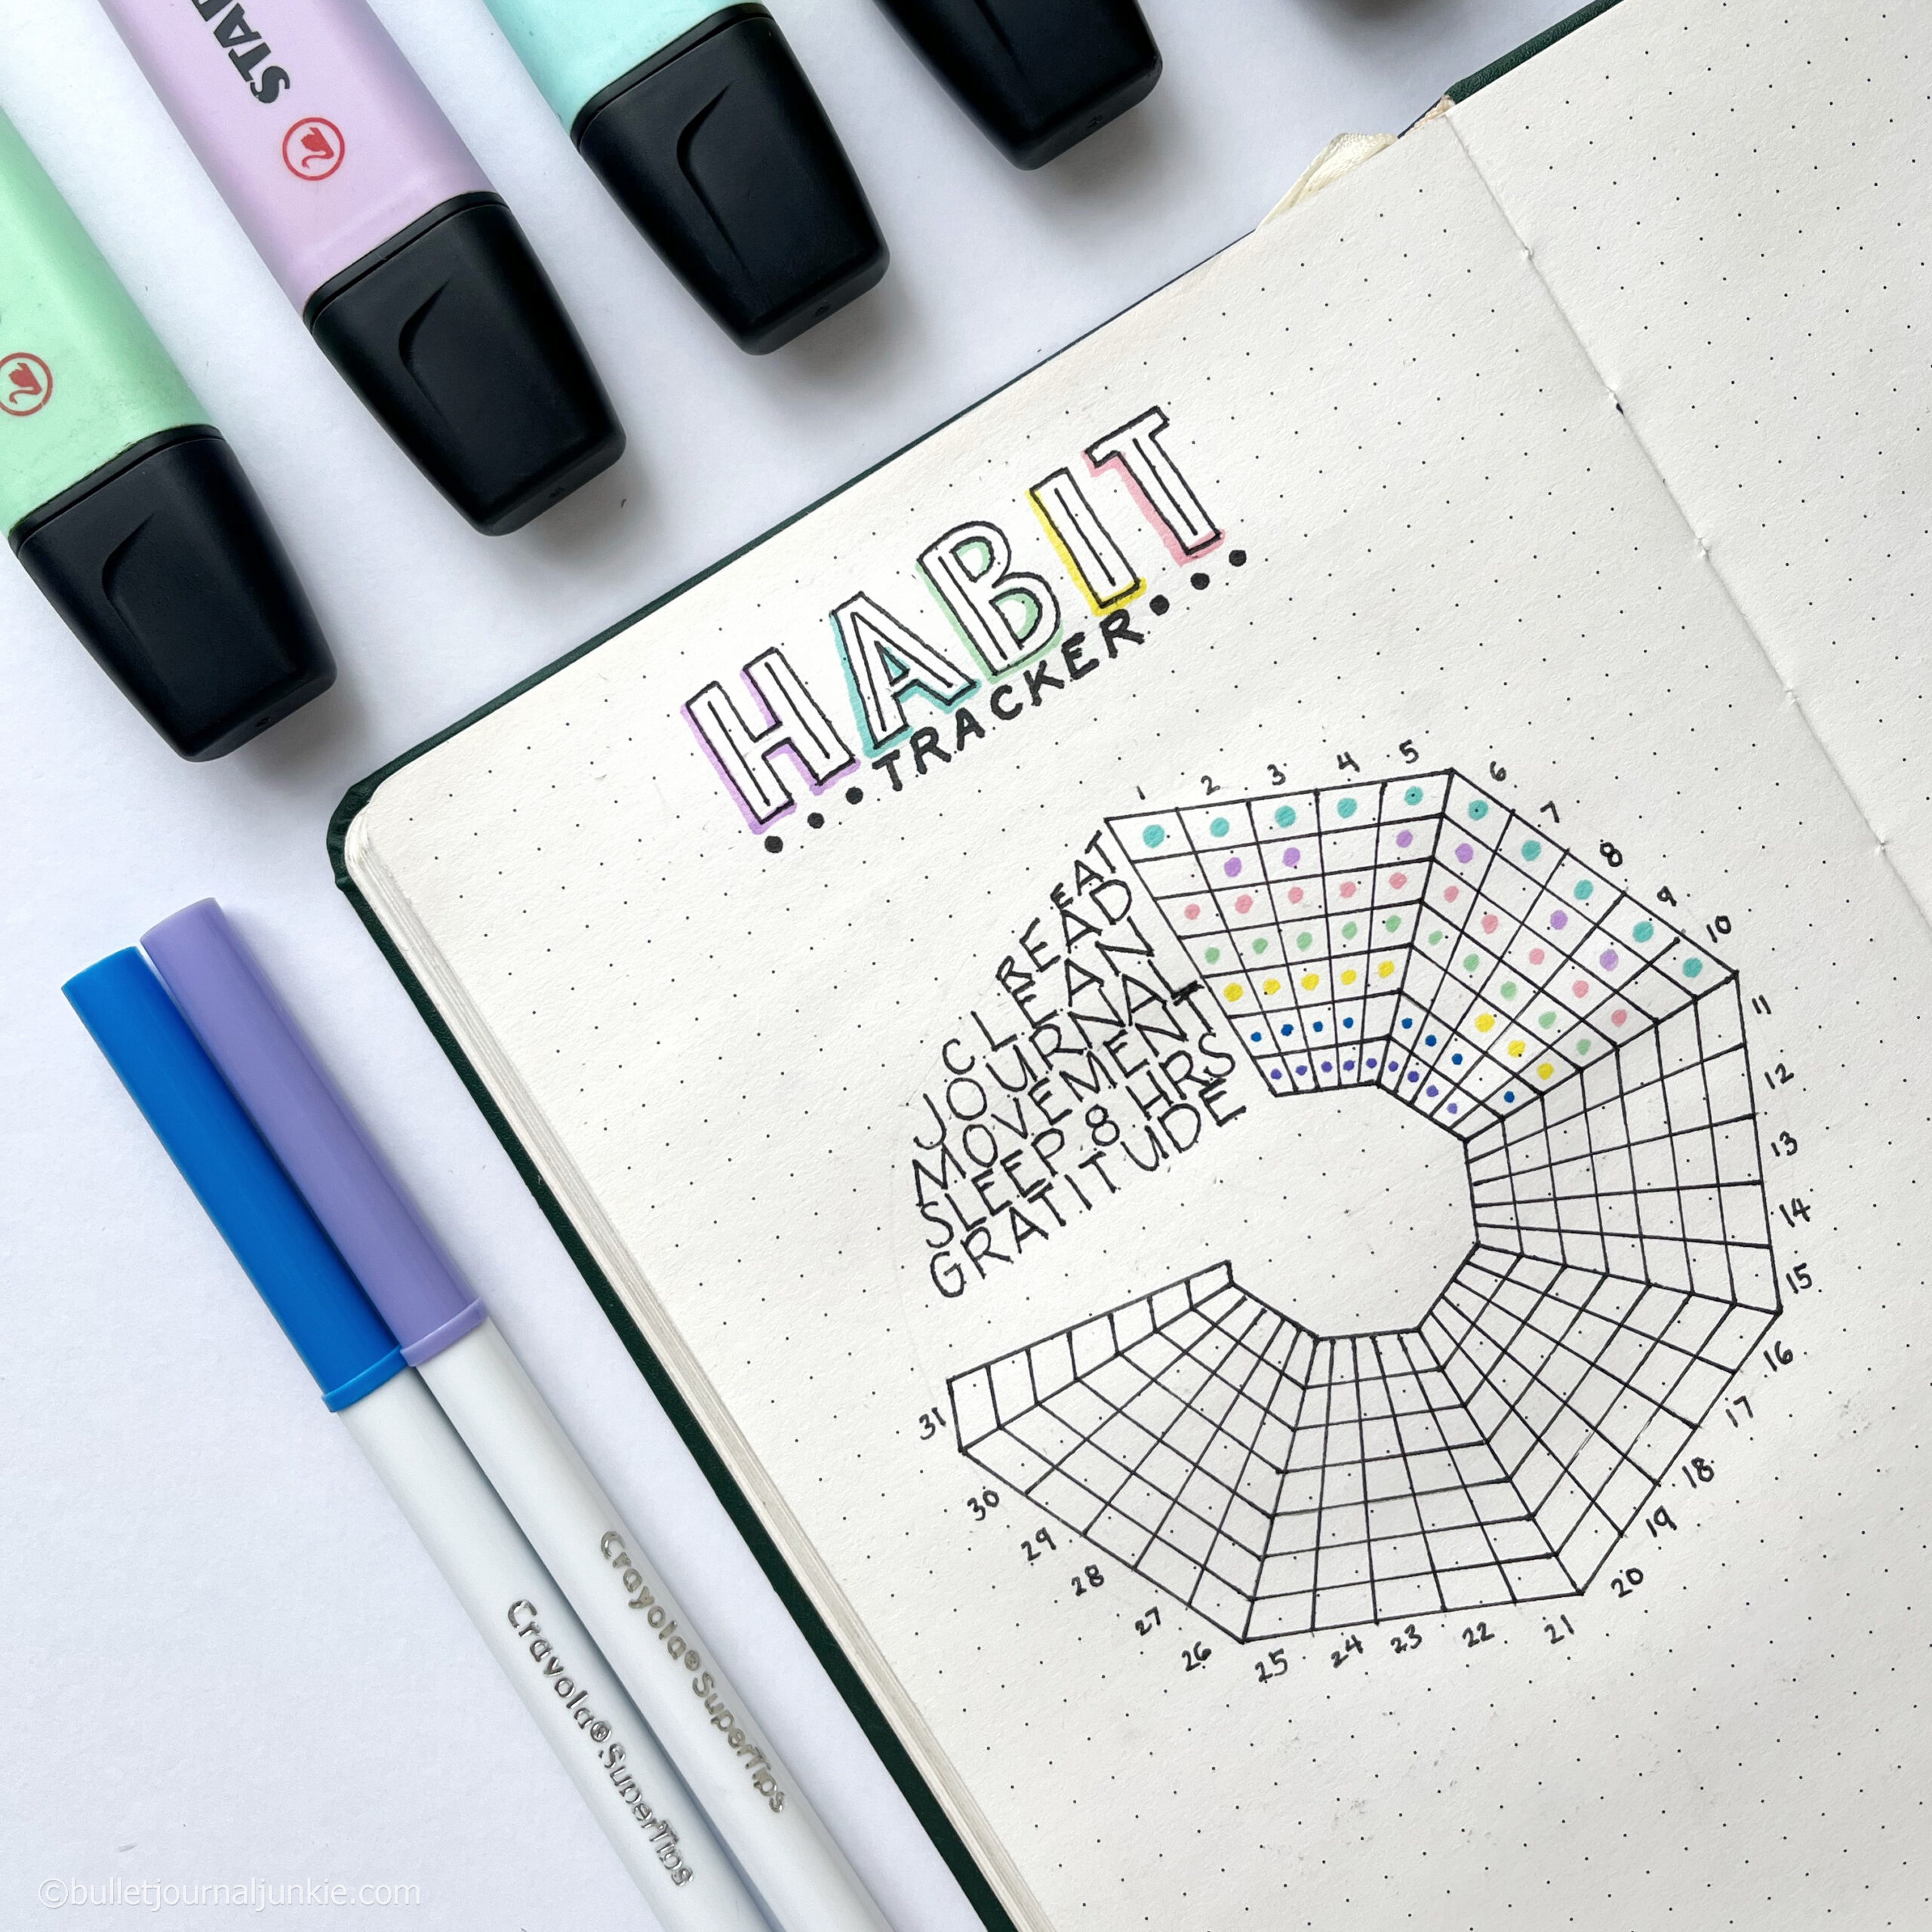 A habit tracker in a bullet journal on a table.